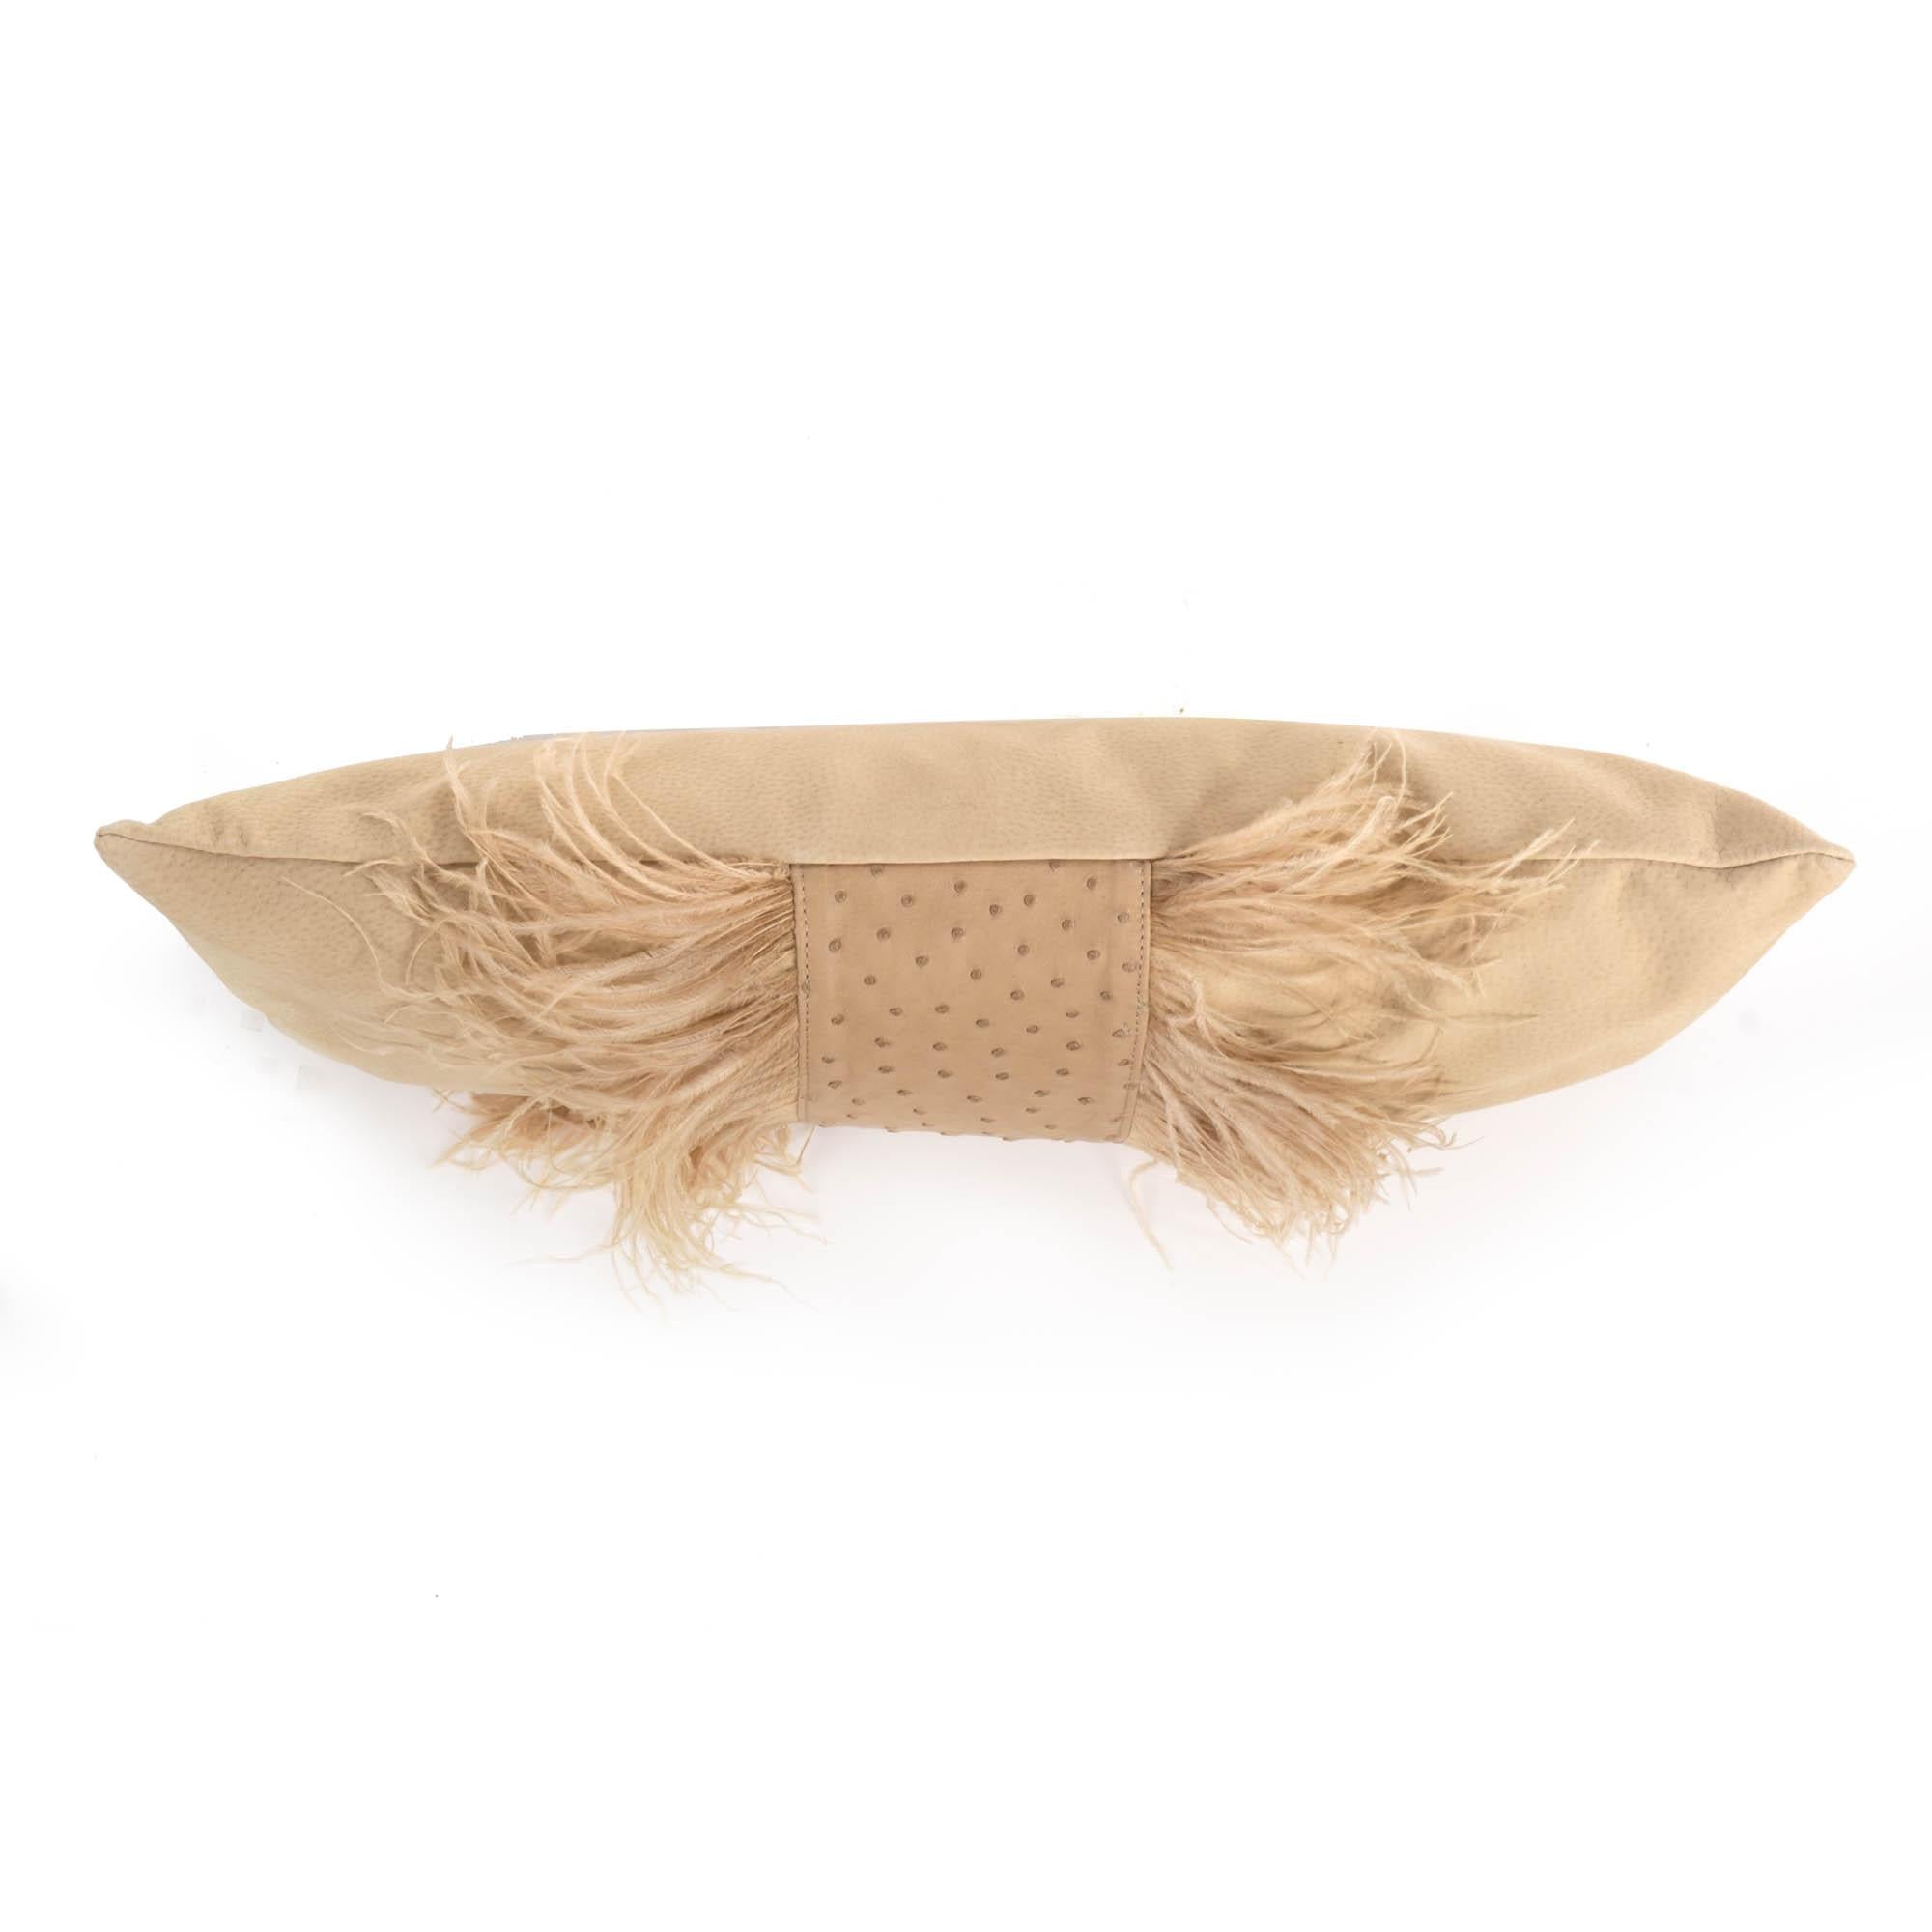 Ostrich Leather Inset Pillow with Feather Trim on Suede - Cream